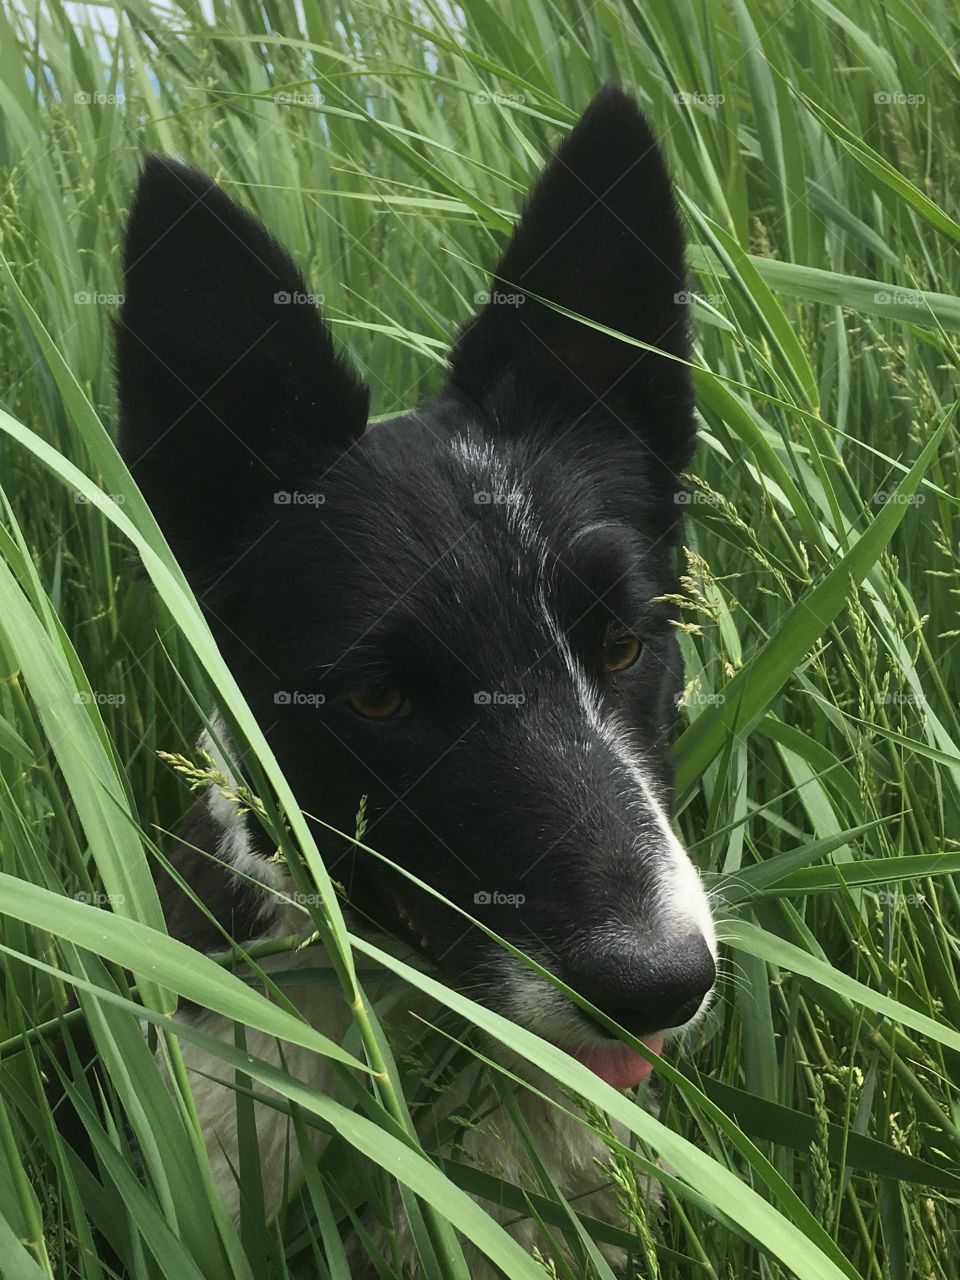 How this young collie’s eyes look wistful as she hides among the green luscious reeds of the marshes 